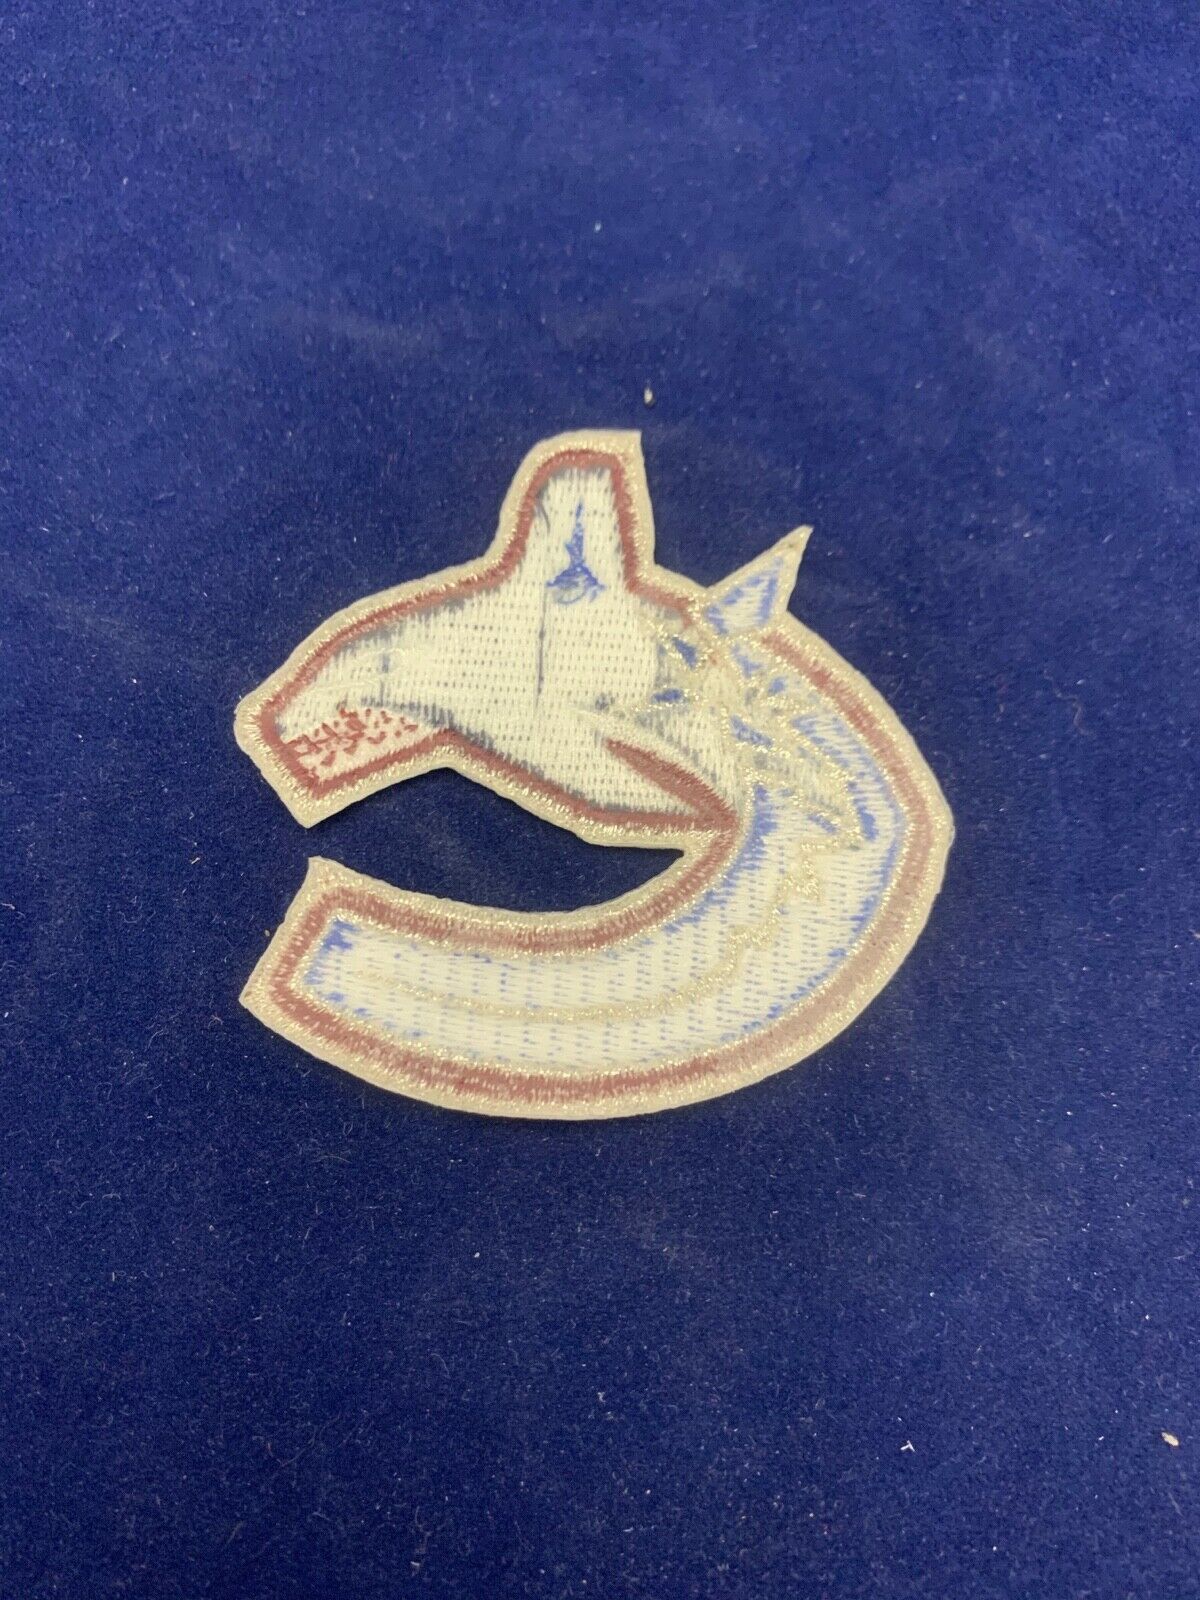 Vancouver Canucks NHL Hockey Patch Size 2.5 x 2.5 inches Older Logo